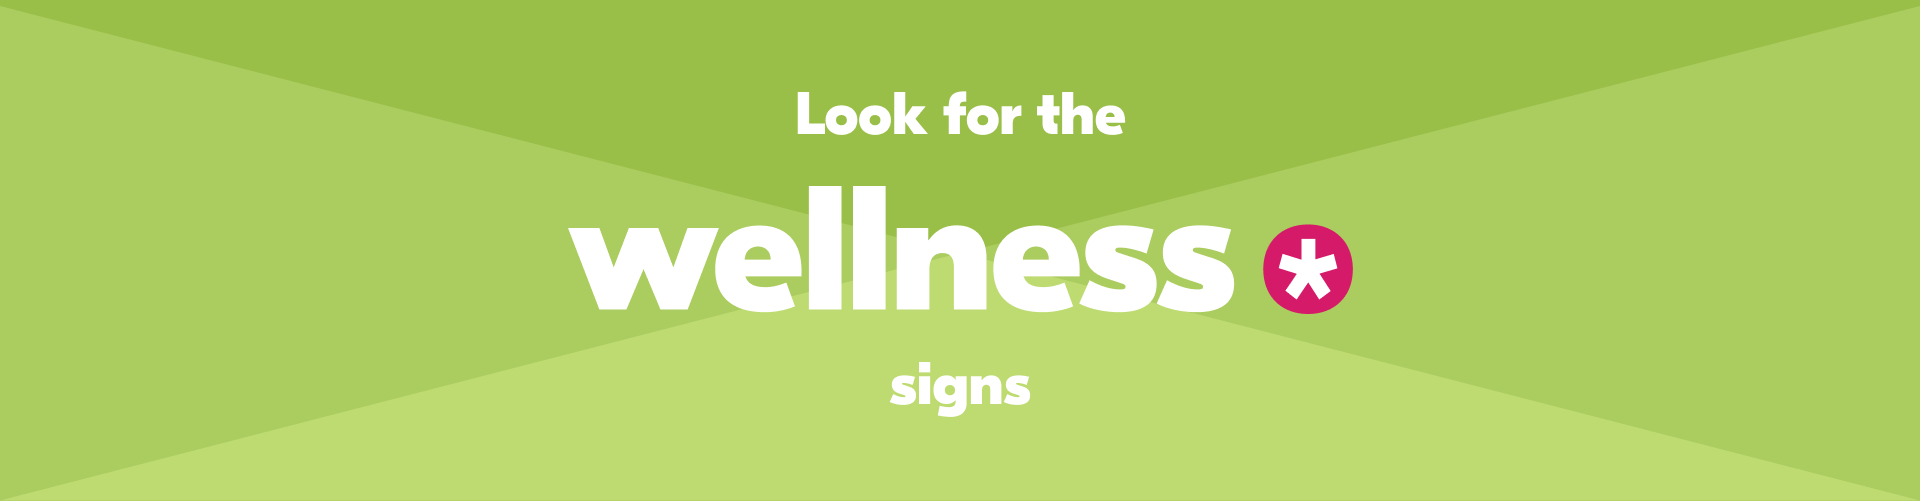 Look for the wellness signs